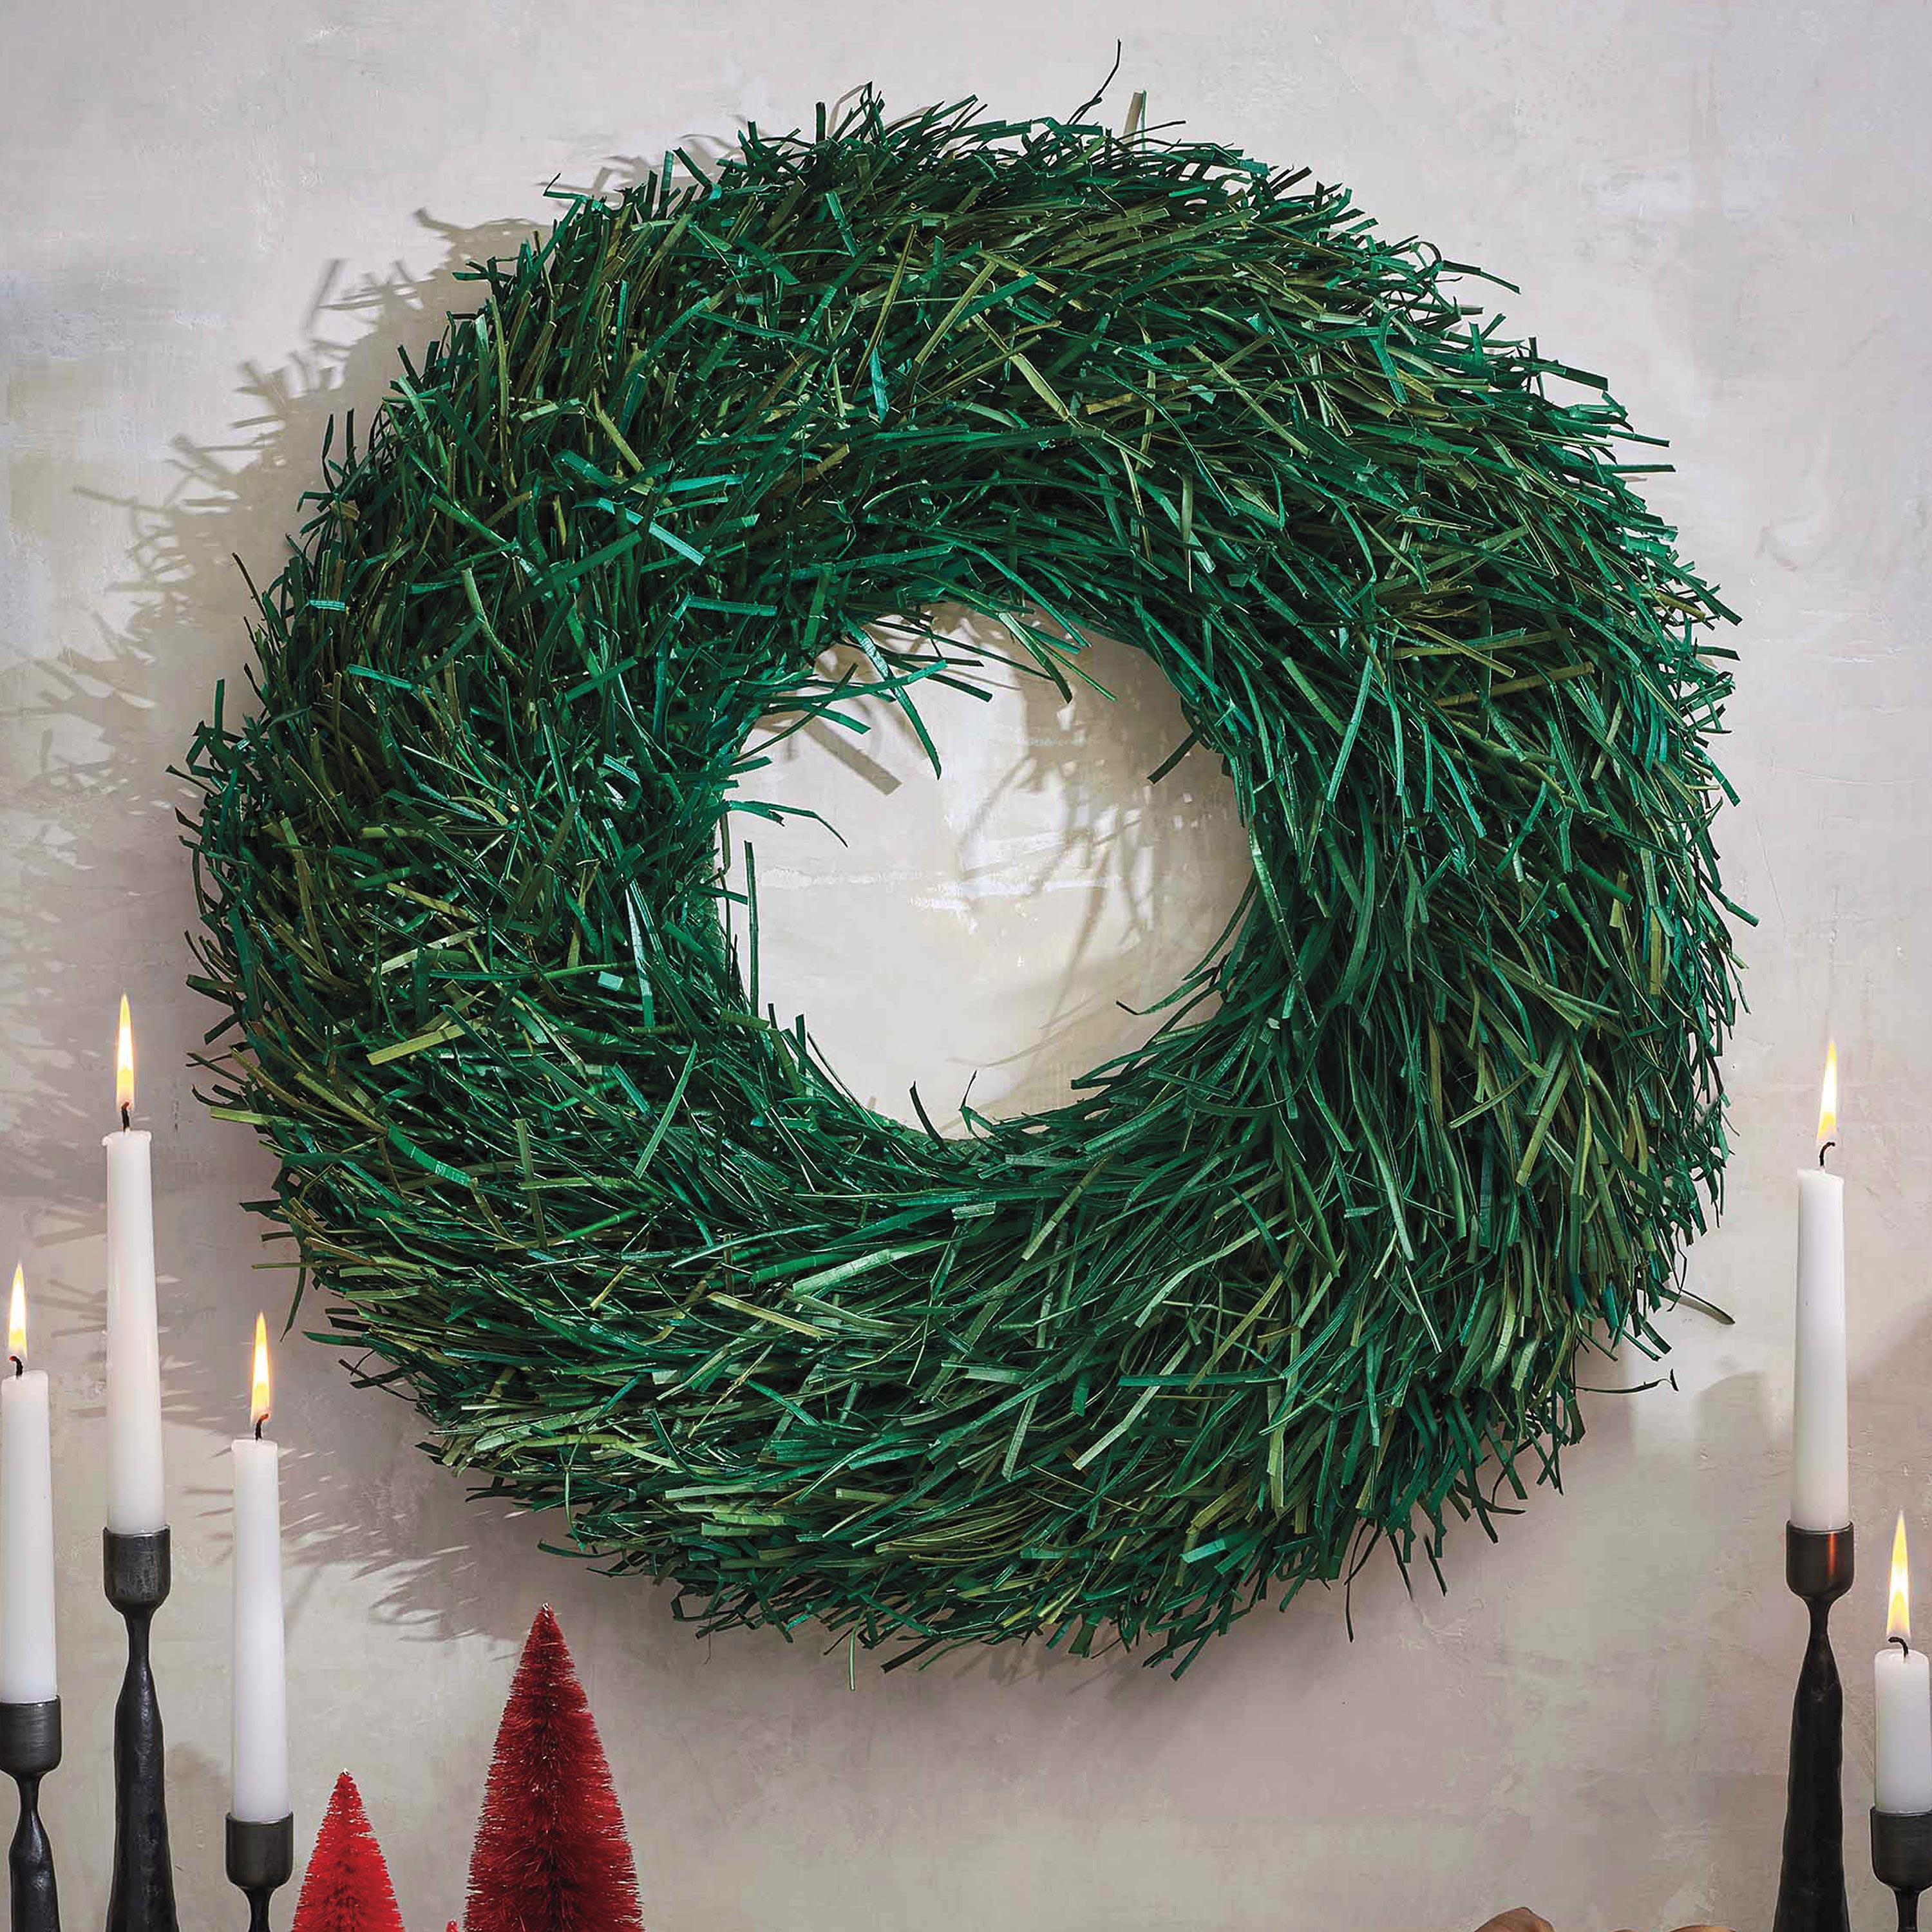 Natural Reed Wonderland Wreath Collection